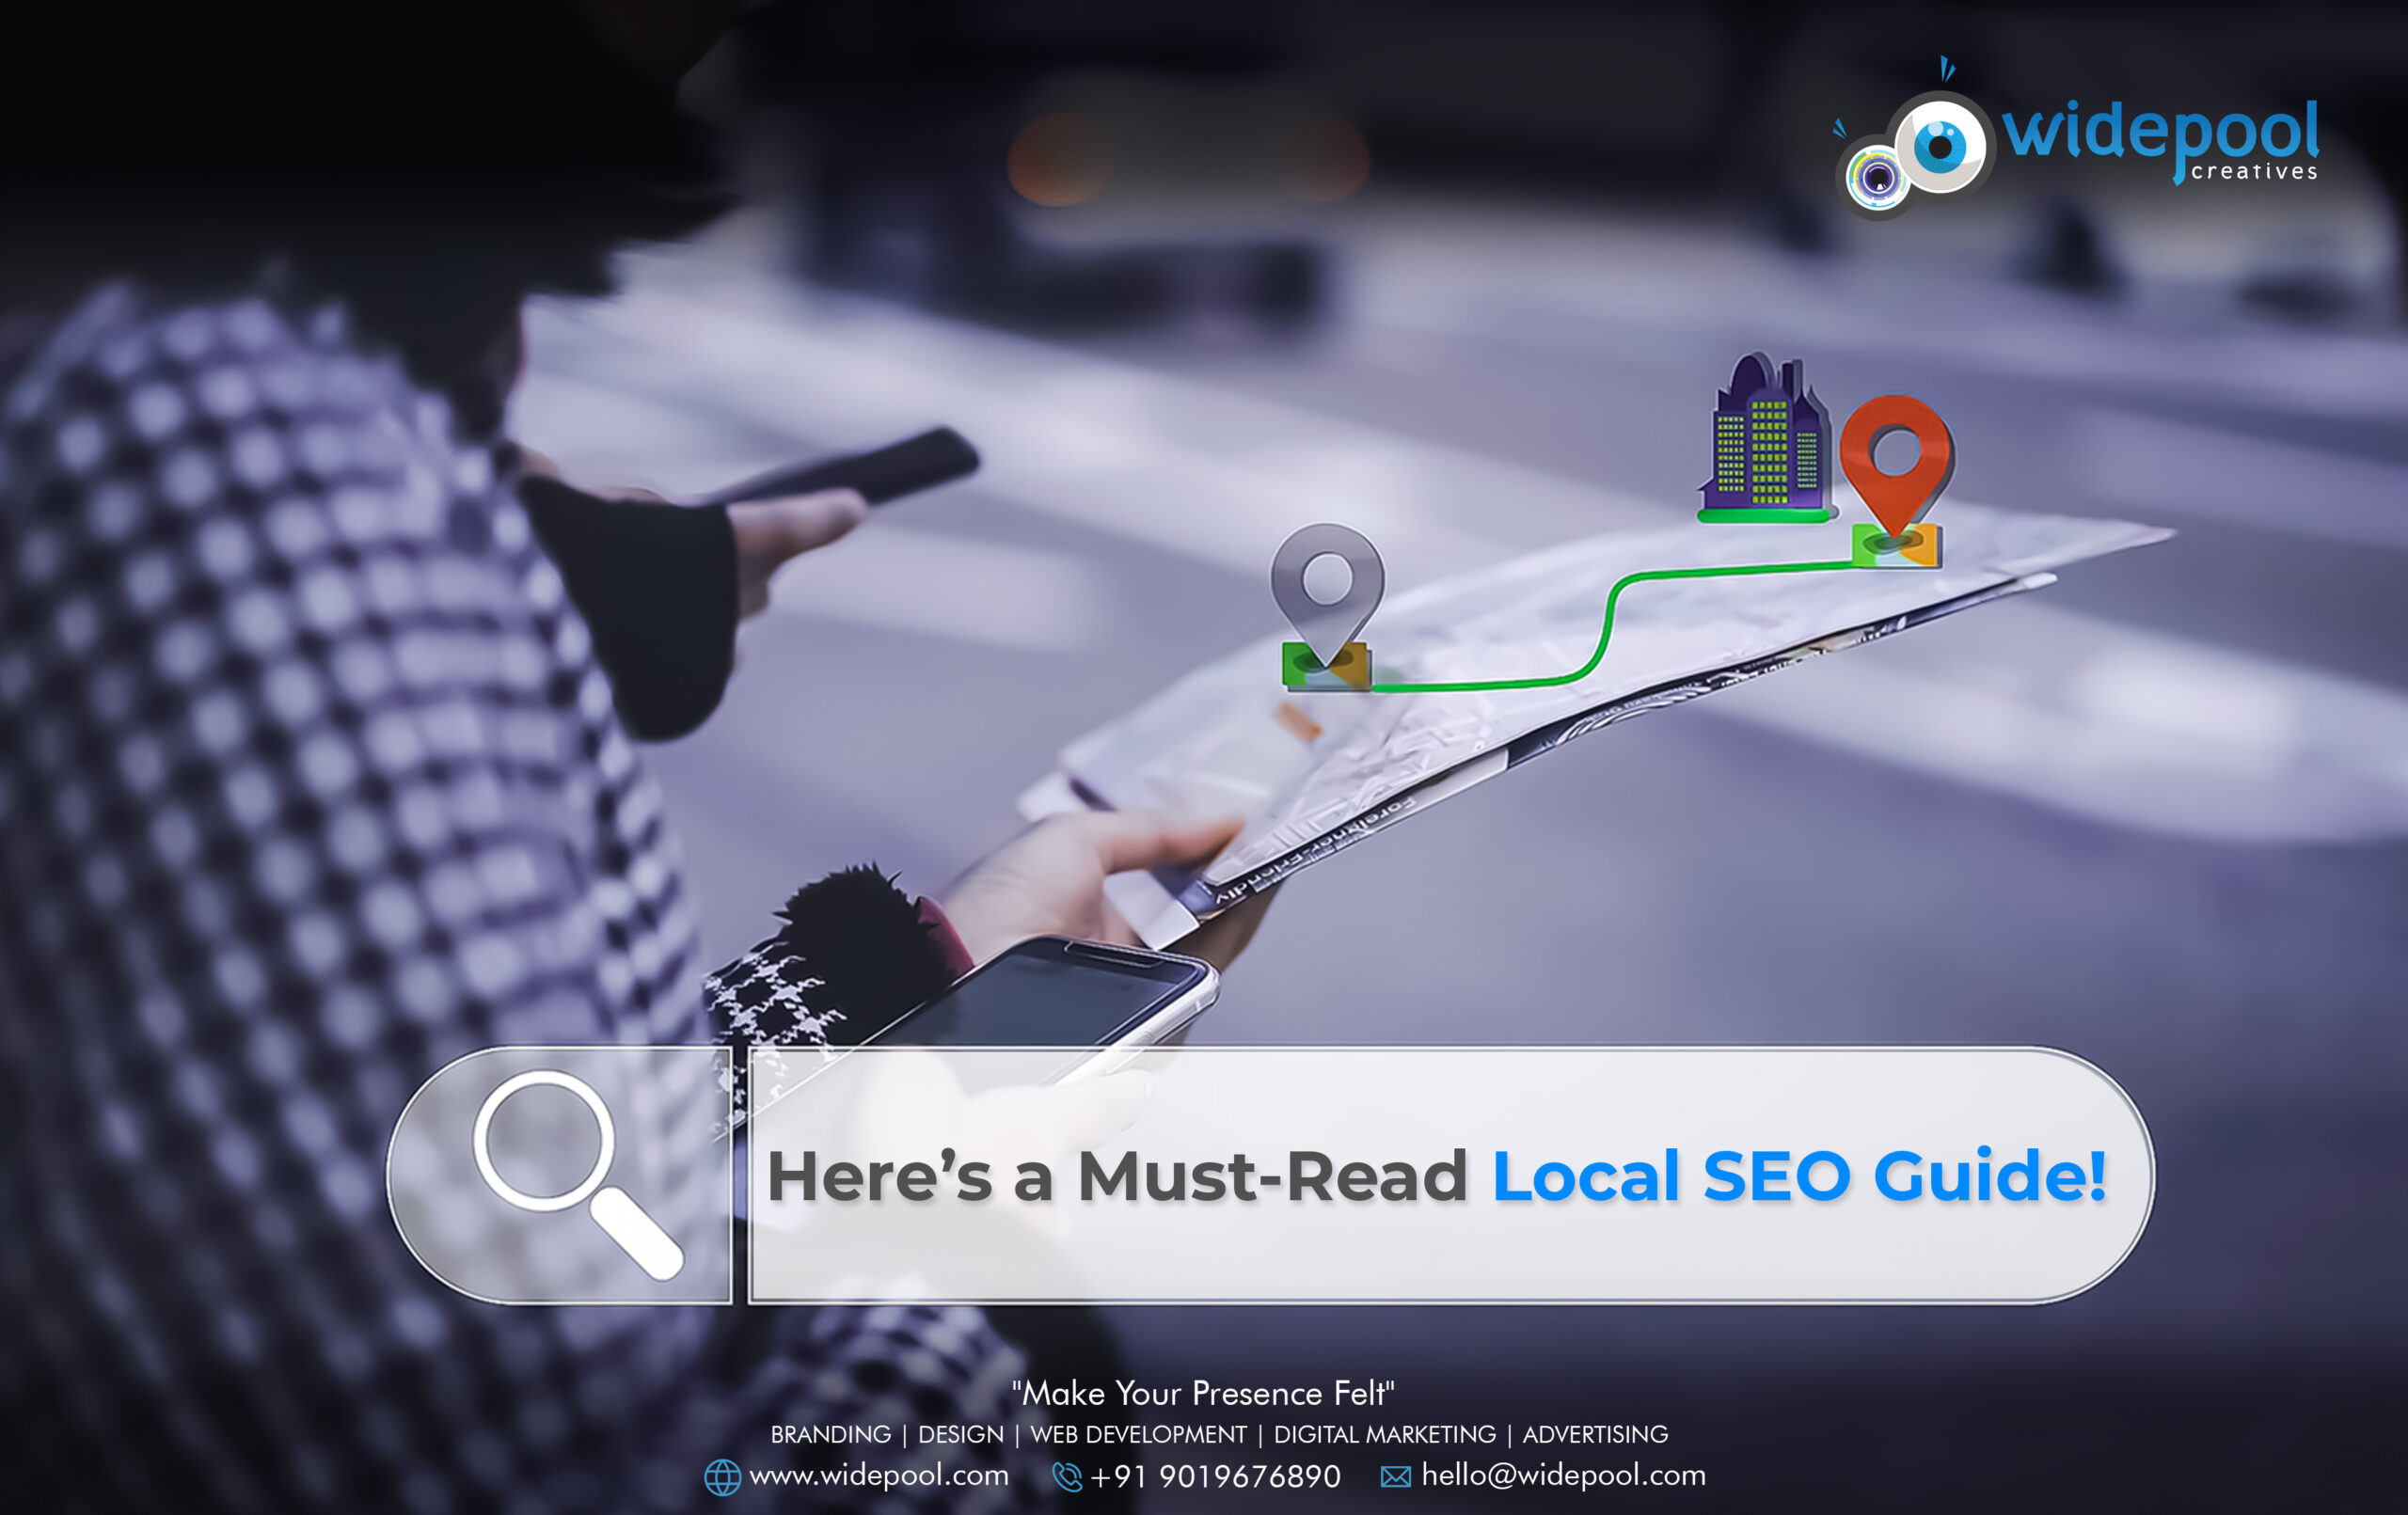 Here’s a Must-Read Local SEO Guide!